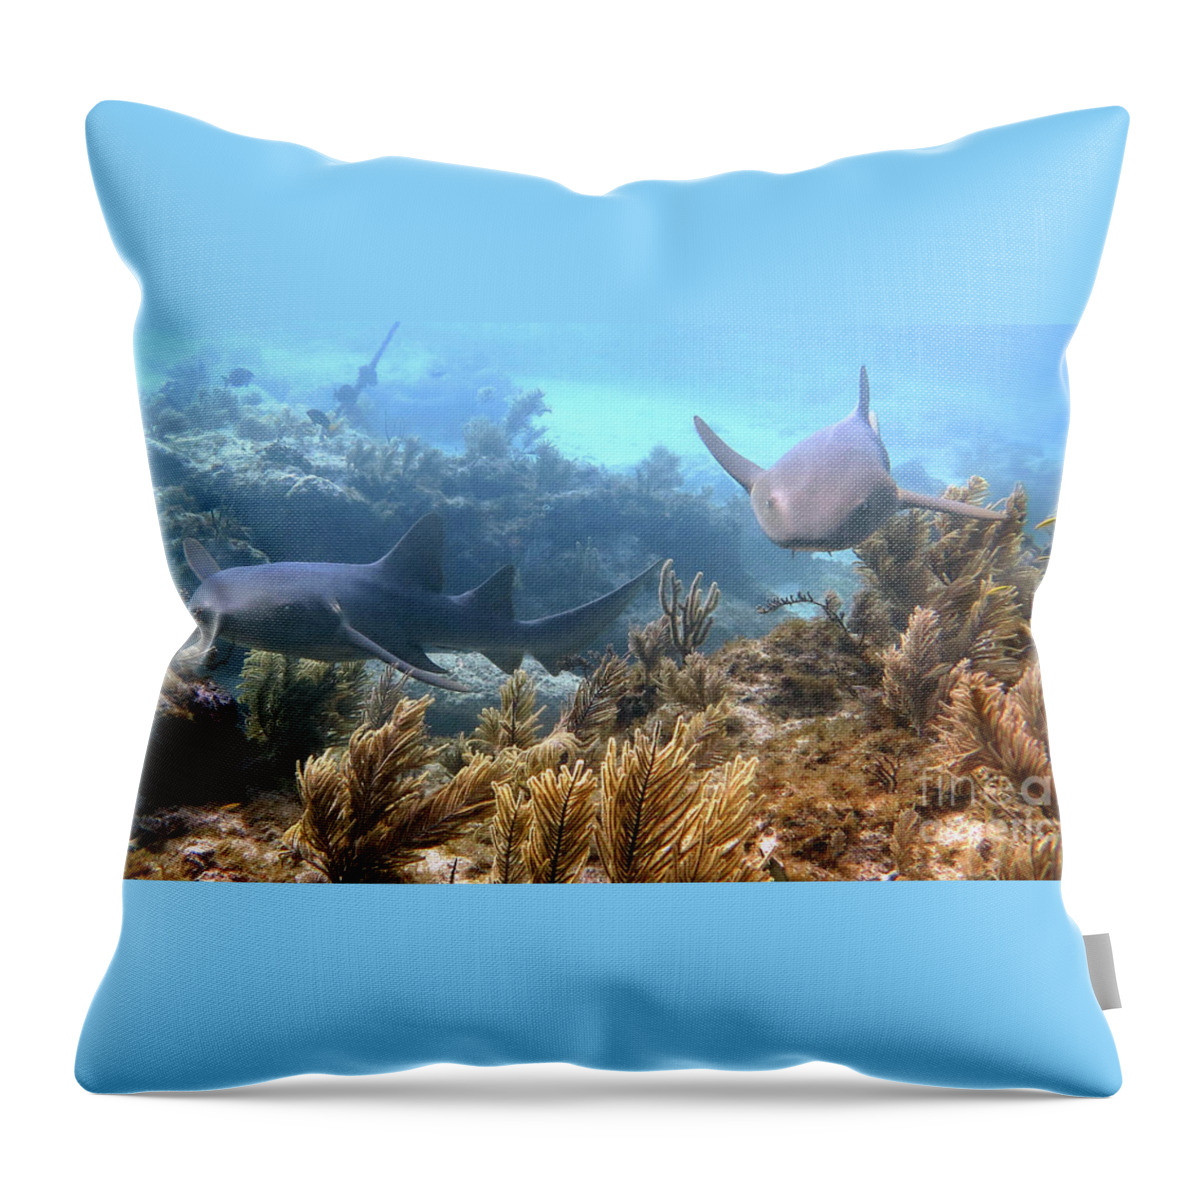 Underwater Throw Pillow featuring the photograph Nurse Sharks by Daryl Duda